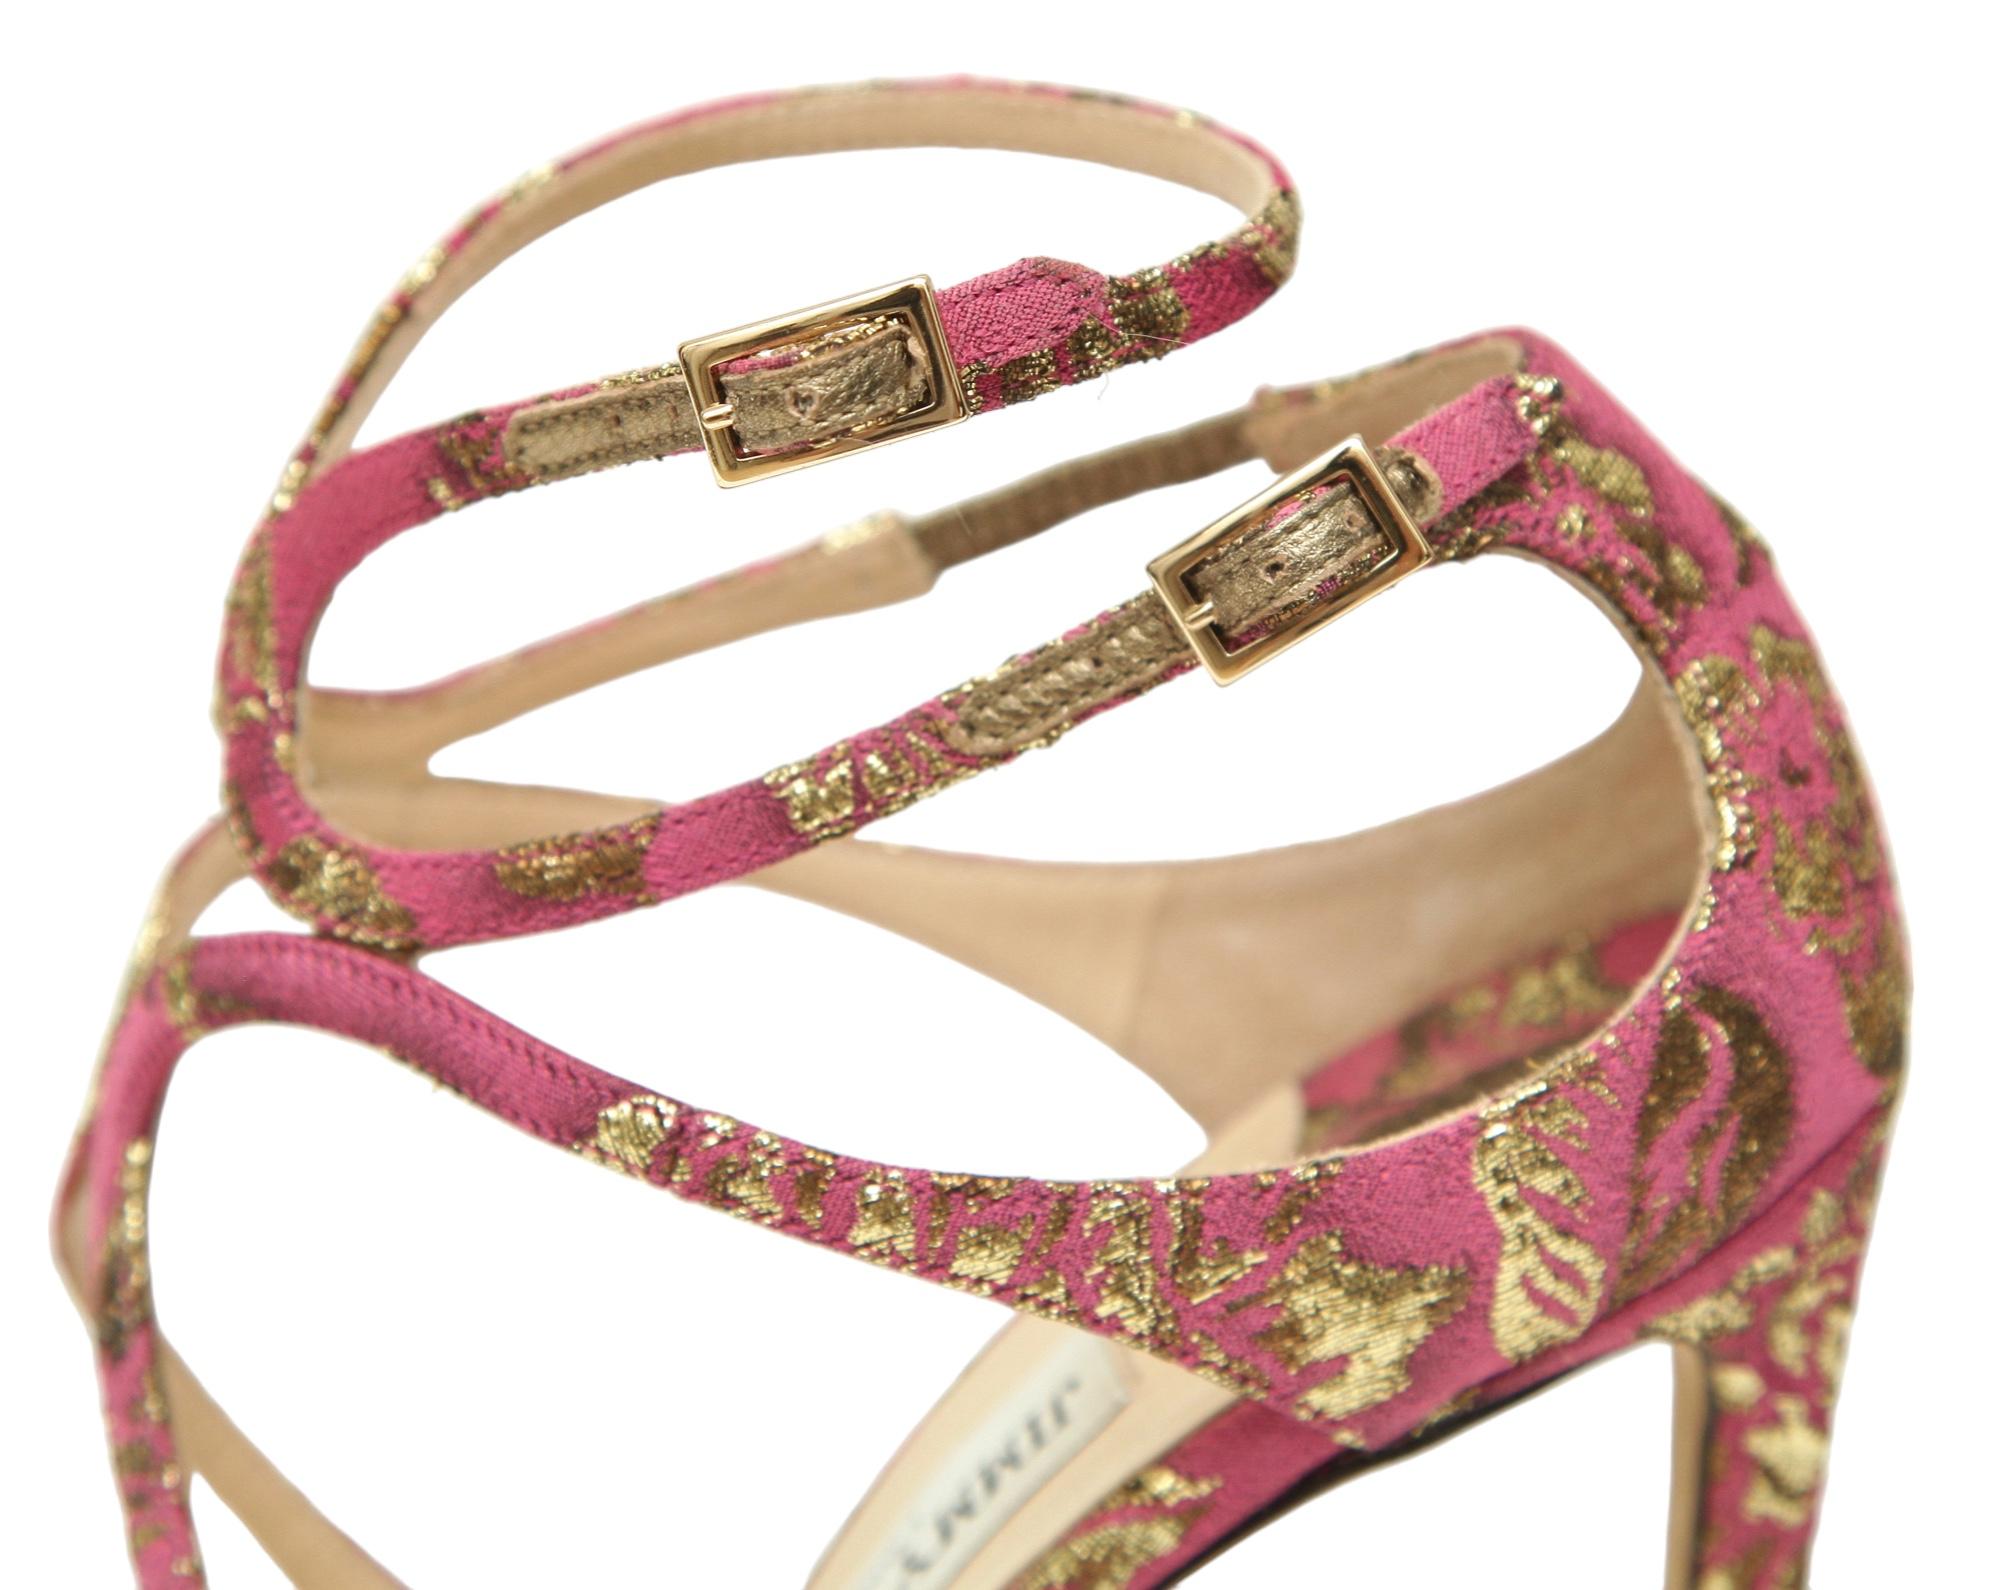 JIMMY CHOO Sandals Brocade Pink Gold Metallic LANCER Heels Leather Strappy 38 For Sale 4